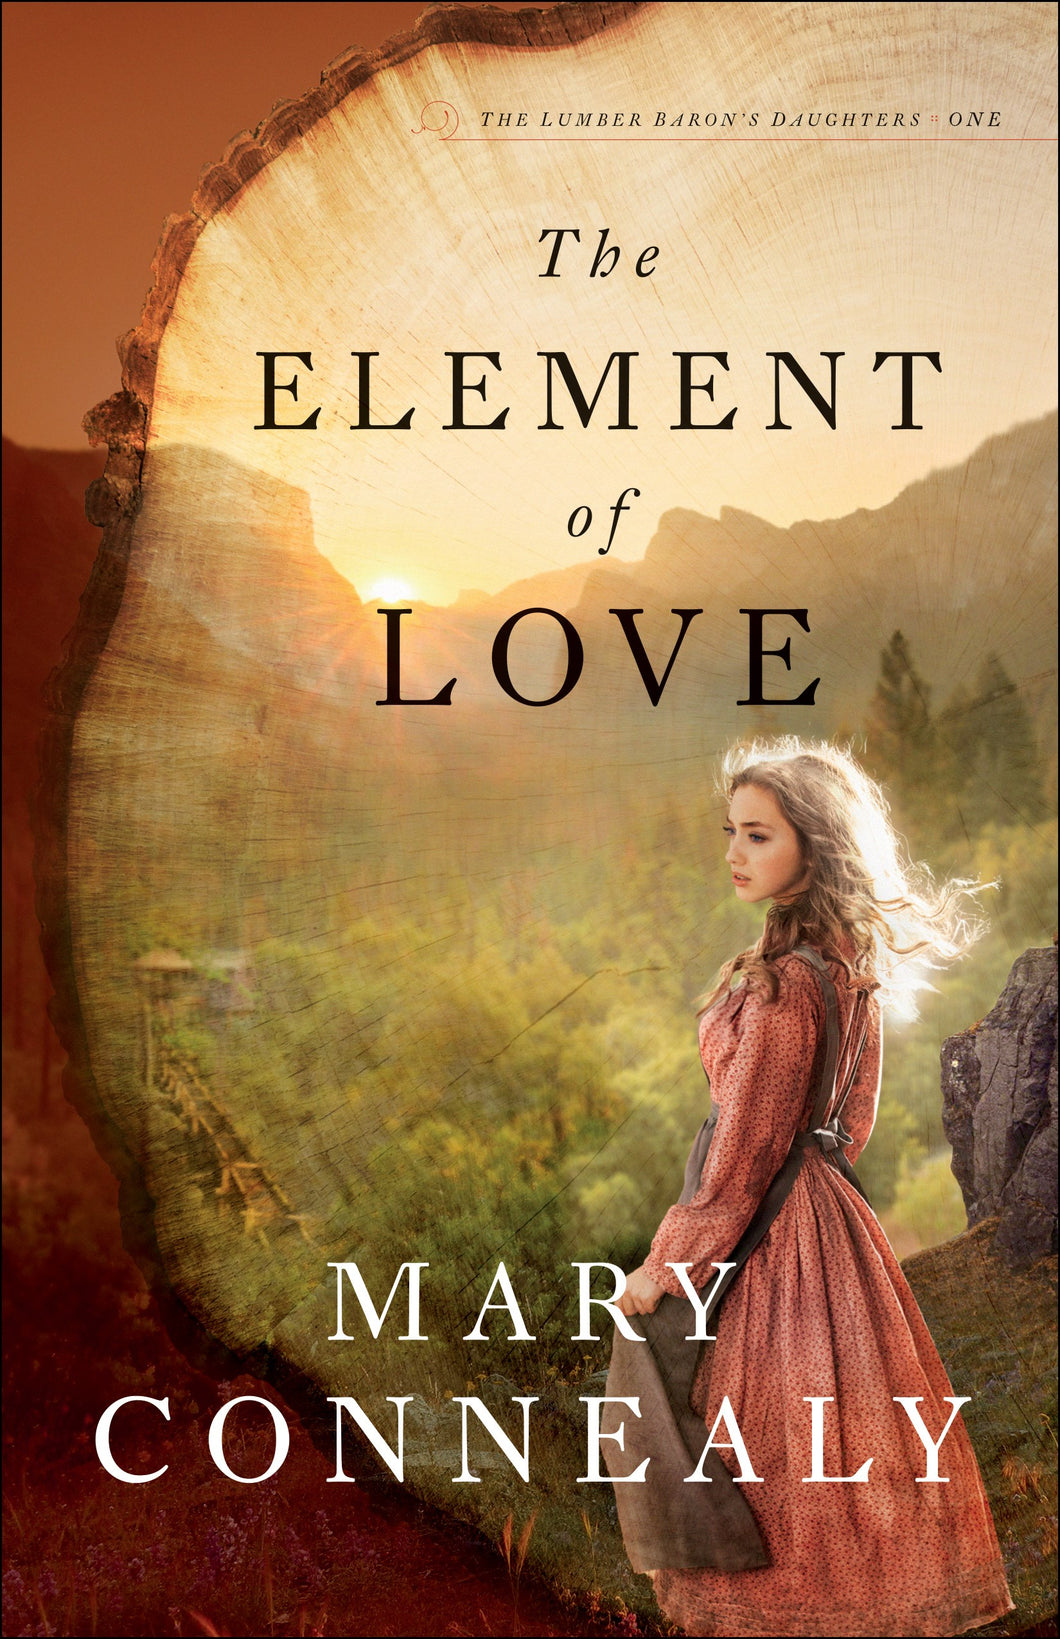 The Element Of Love (The Lumber Baron's Daughters #1)